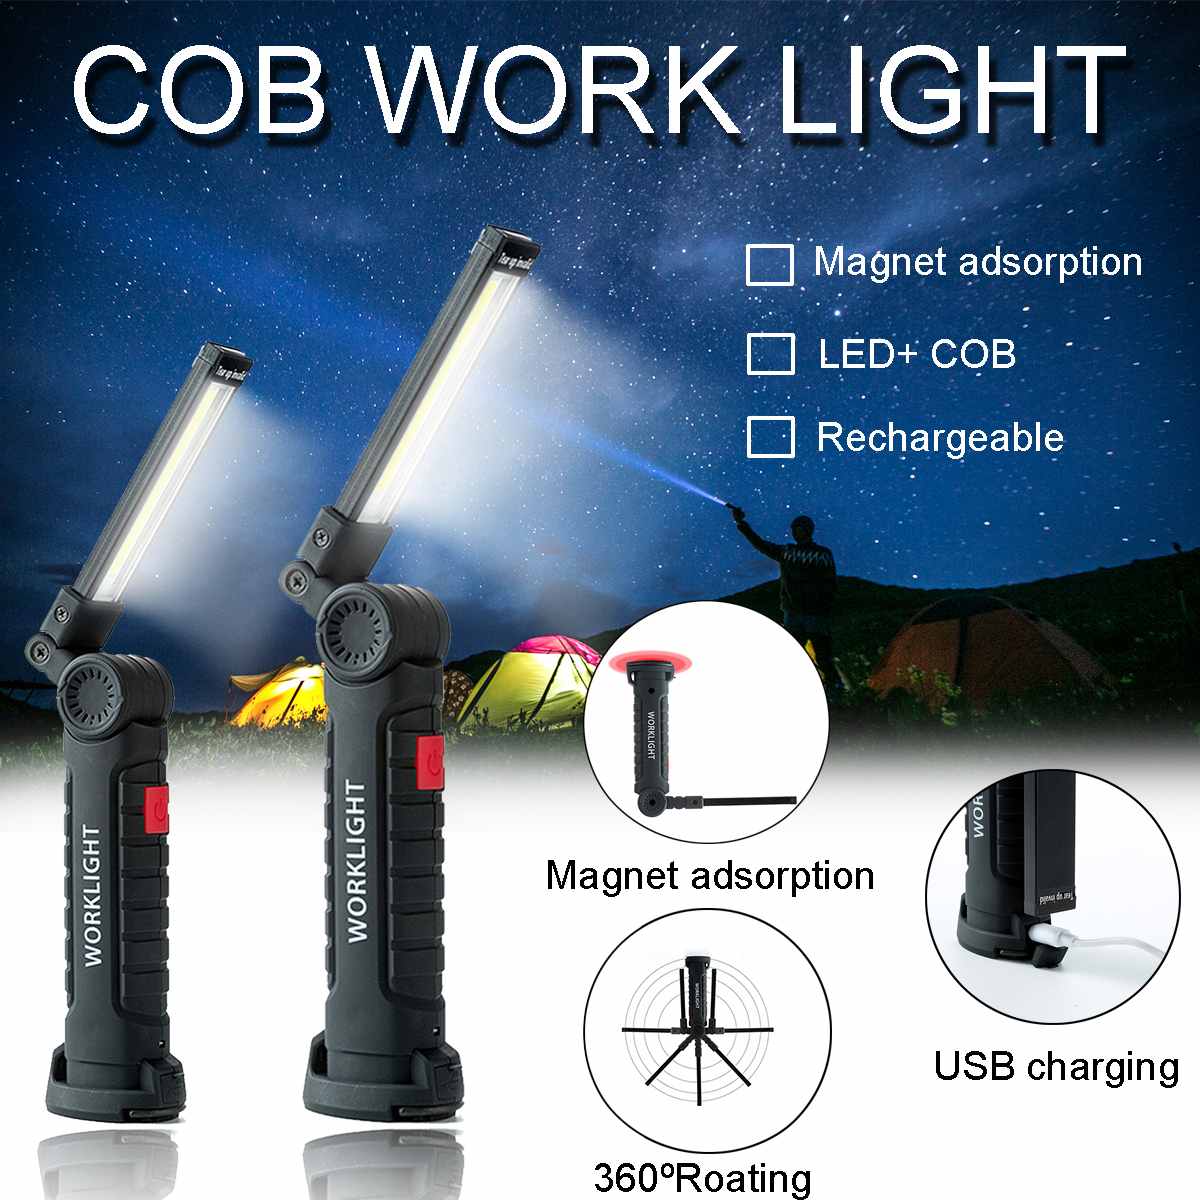 COB LED Magnetic Work Light Rechargeable Inspection Torch Lamp Flexible Cordless 